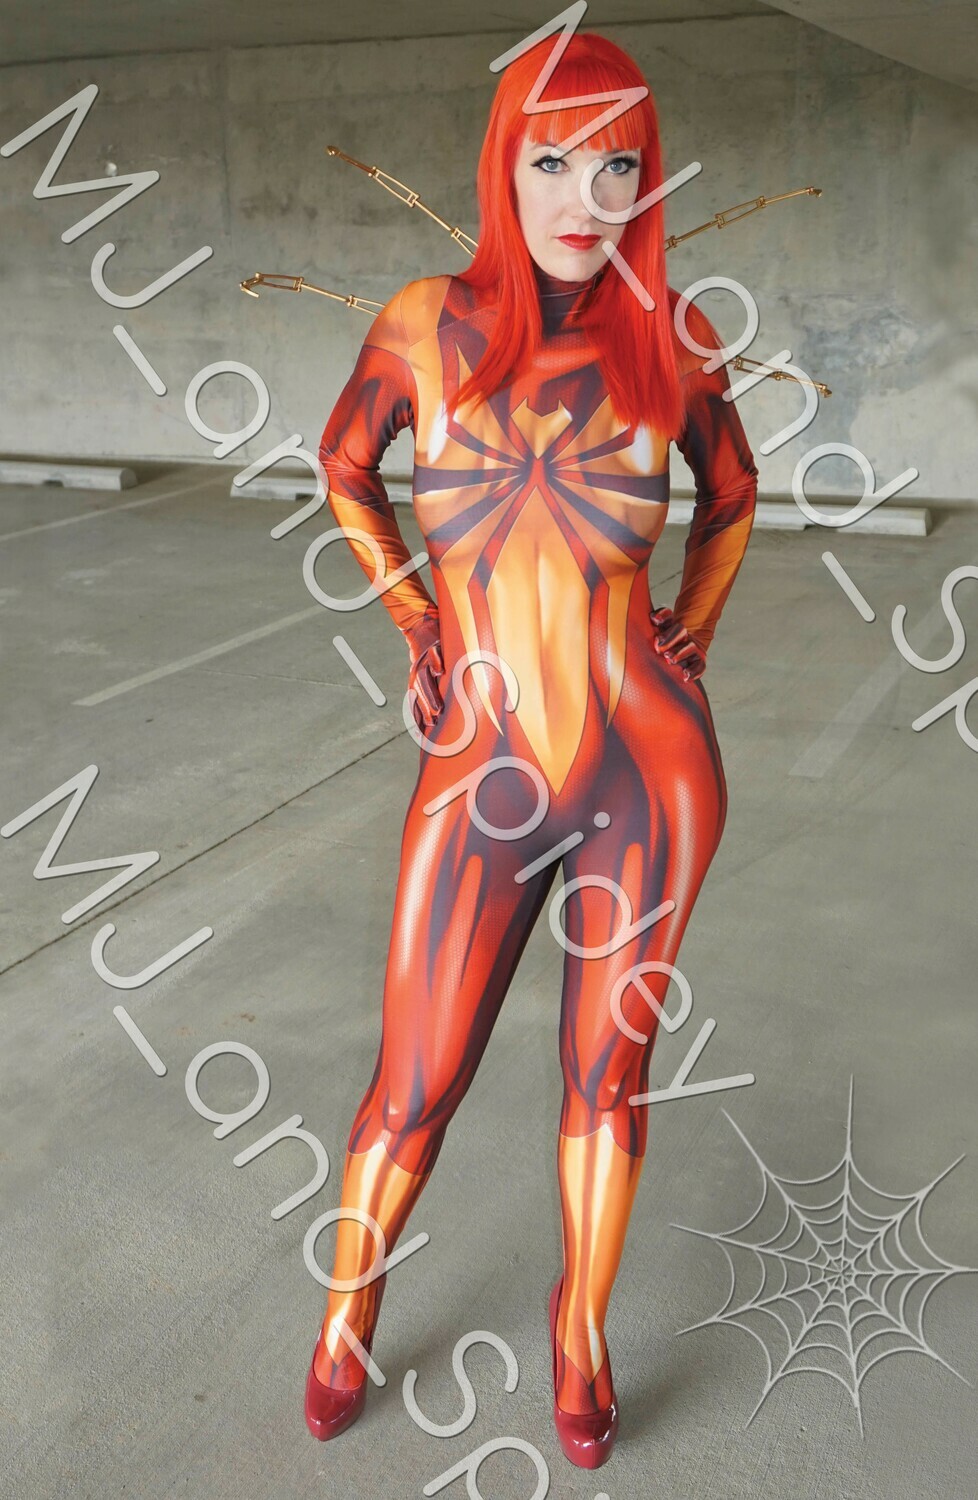 Marvel - Spider-Man - Iron Spider 7 - 11x17 Cosplay Print (@MJ_and_Spidey, MJ and Spidey, Comics)